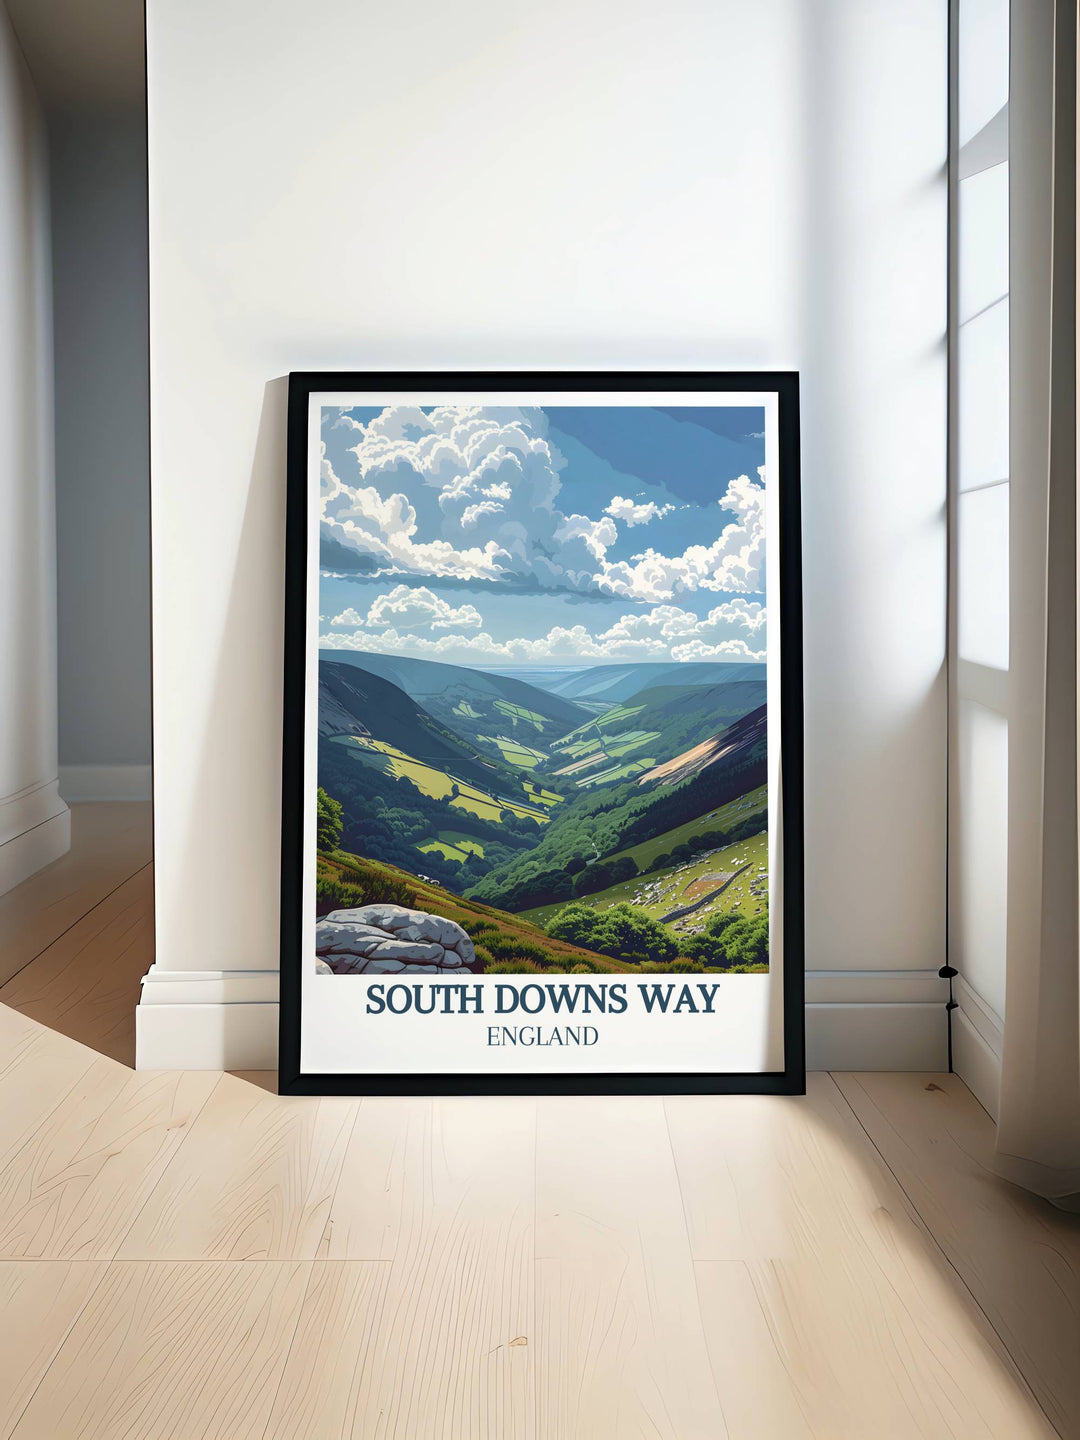 Gallery wall art of the South Downs Way showcasing the rolling hills and scenic trails of one of Englands most picturesque national parks, perfect for adding a touch of nature to your home decor.